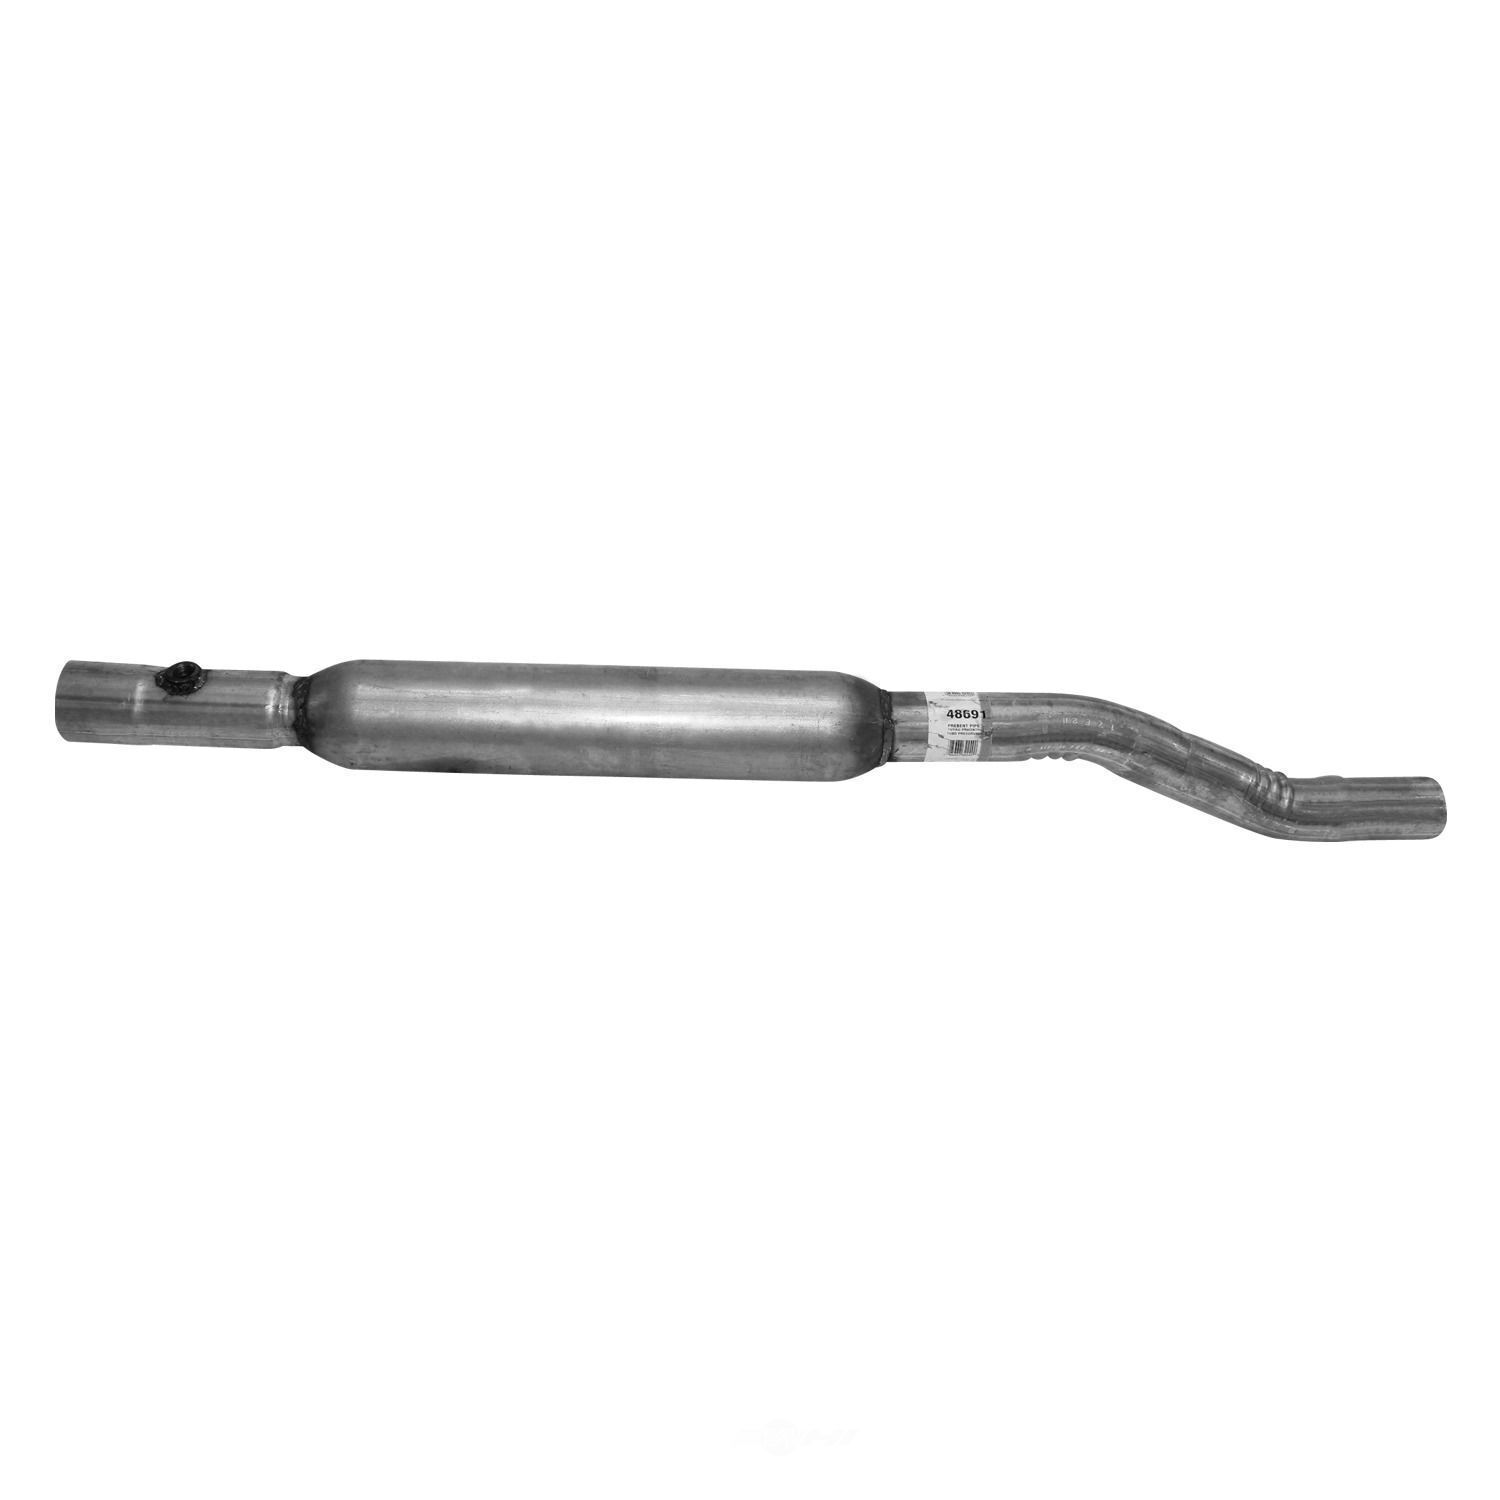 Exhaust Pipe Front AP Exhaust 48691 fits 06-11 Cadillac DTS 4.6L-V8